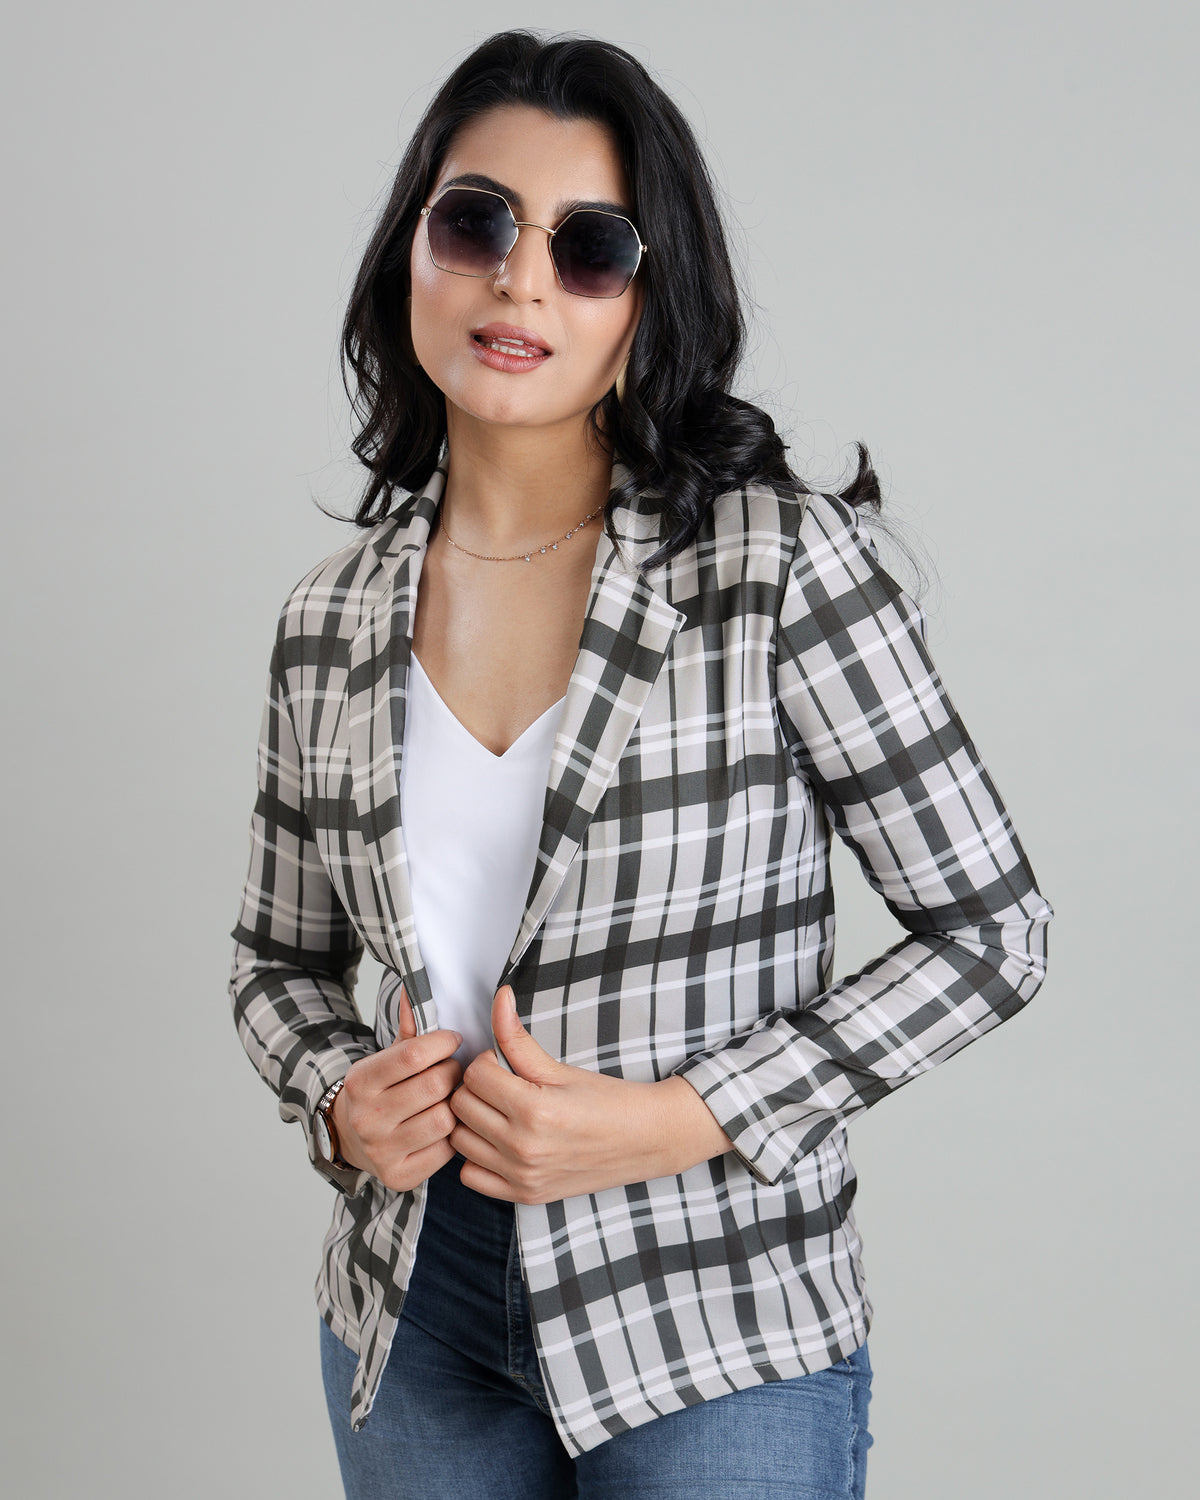 Check This Out: The Women's Jacket You Need